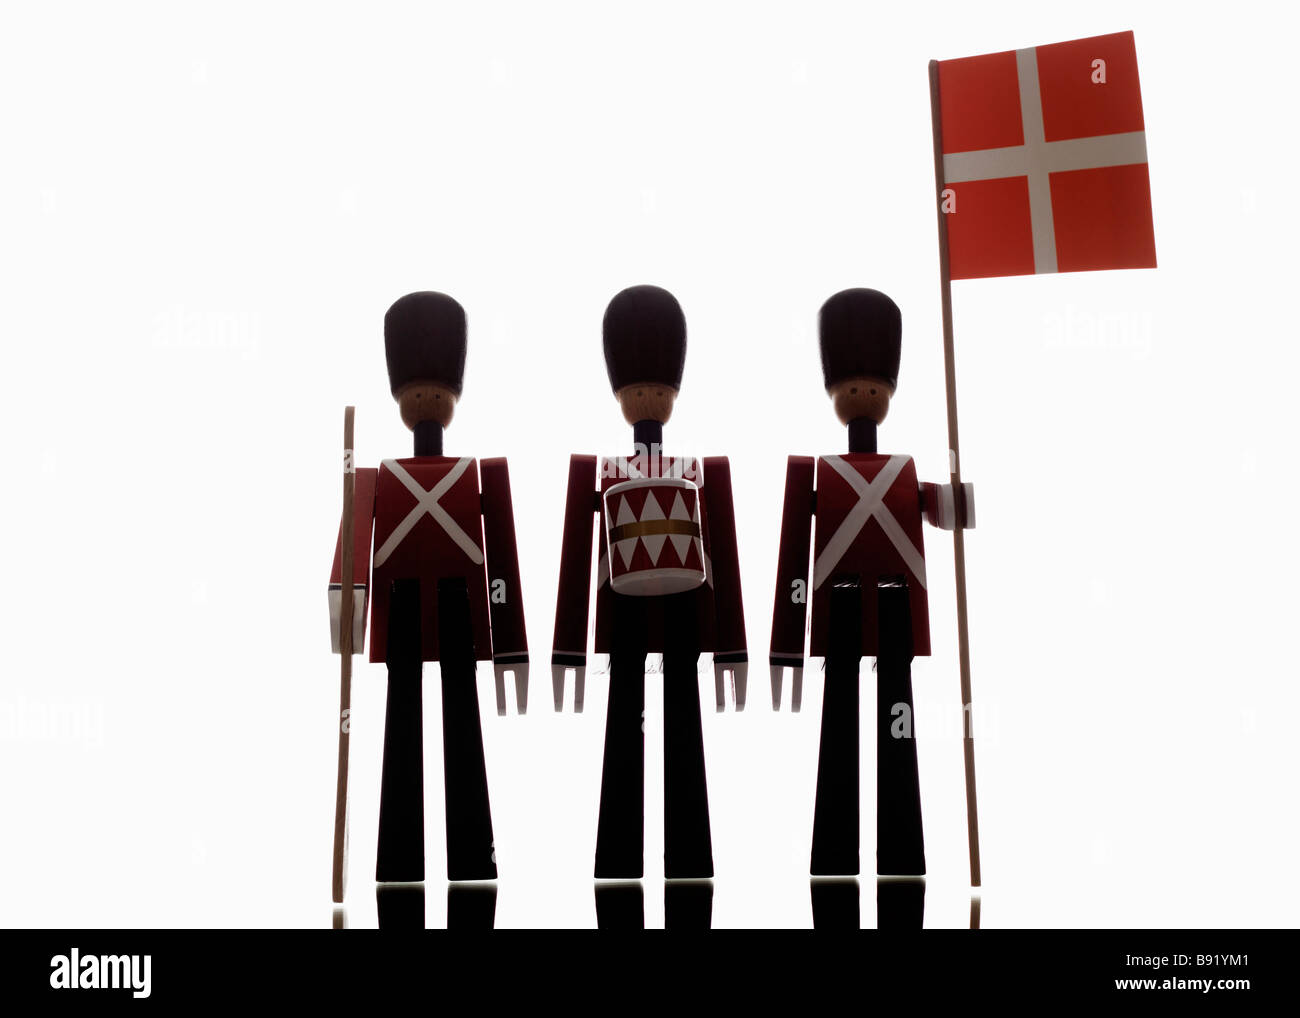 The Danish lifeguards in the shape of dolls. Stock Photo